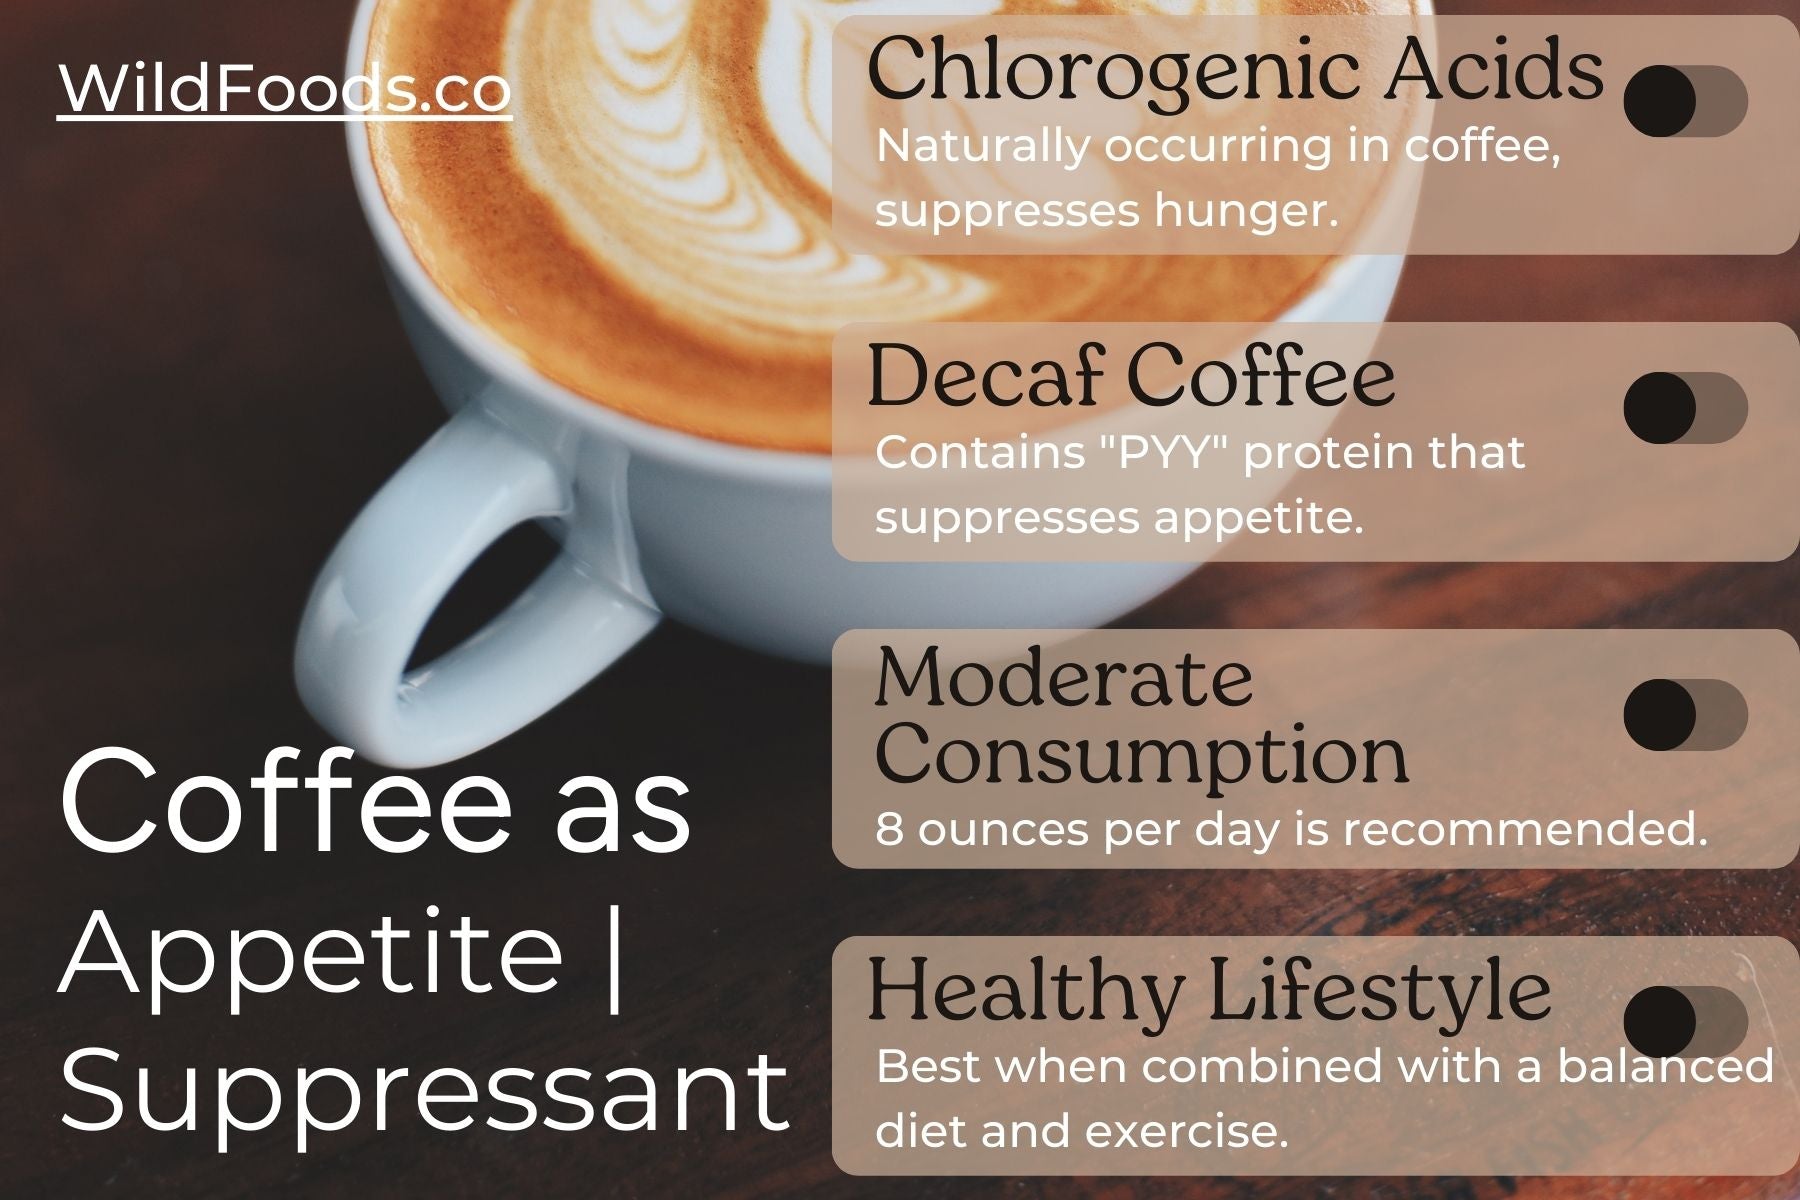 Coffee-as-Appetite-Suppressant